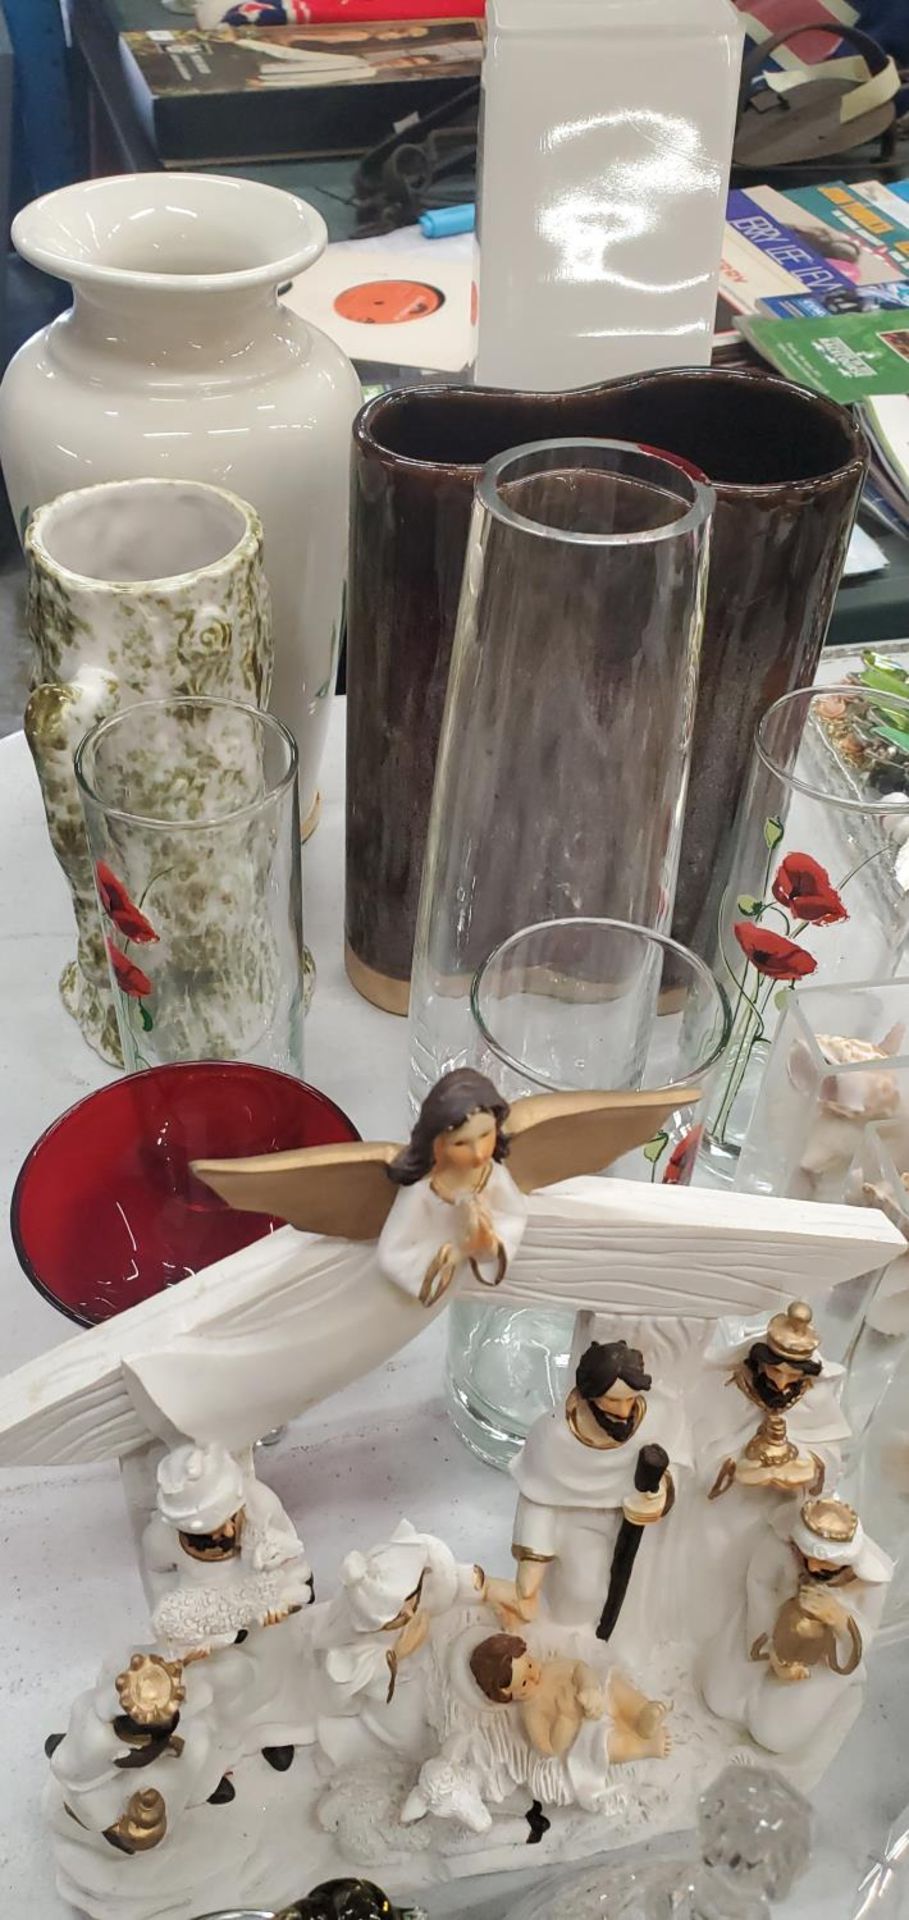 A MIXED LOT TO INCLUDE VASES, TUMBLERS, PHOTO FRAMES, SHELLS, A NATIVITY SCENE, GLASSWARE, ETC - Image 2 of 3